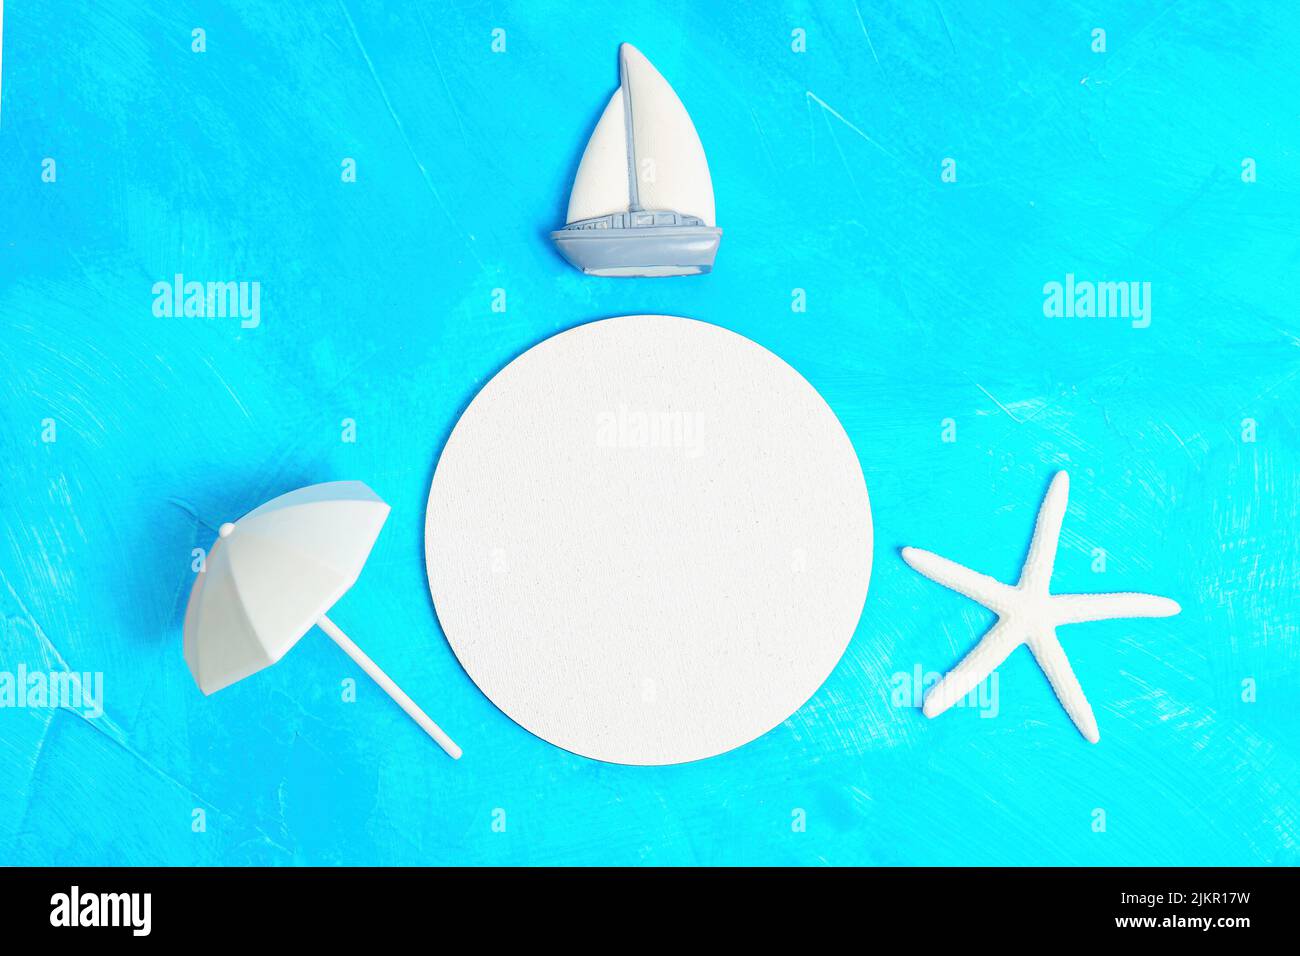 Creative summer vacation background with copy space made from a sea star, ship and sun umbrella props placed on blue background imitating water. Stock Photo